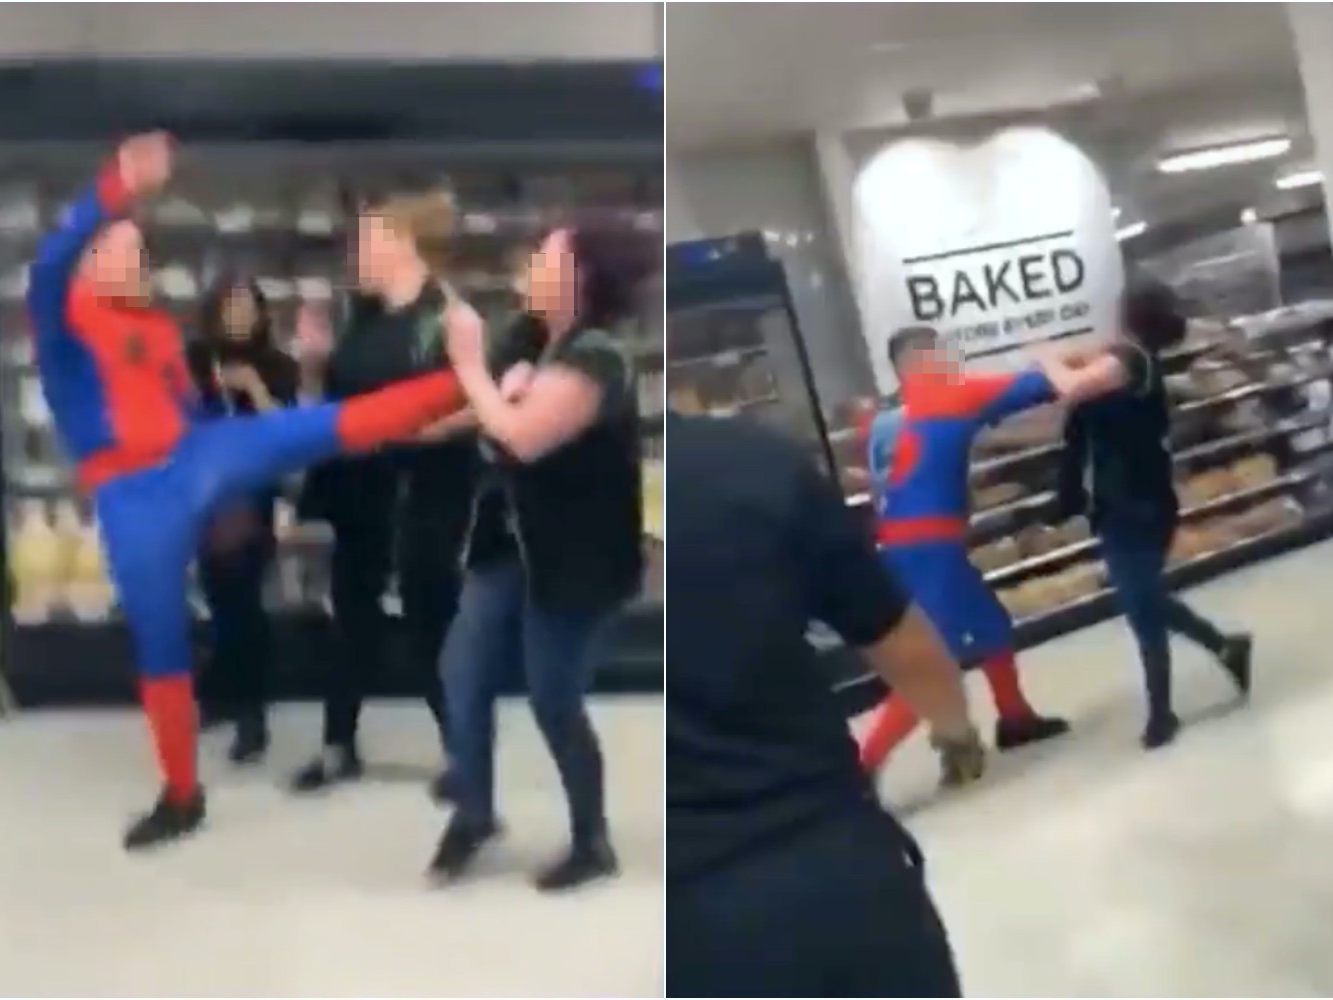 Screenshots of the man dressed as Spider-Man attacking a female Asda worker